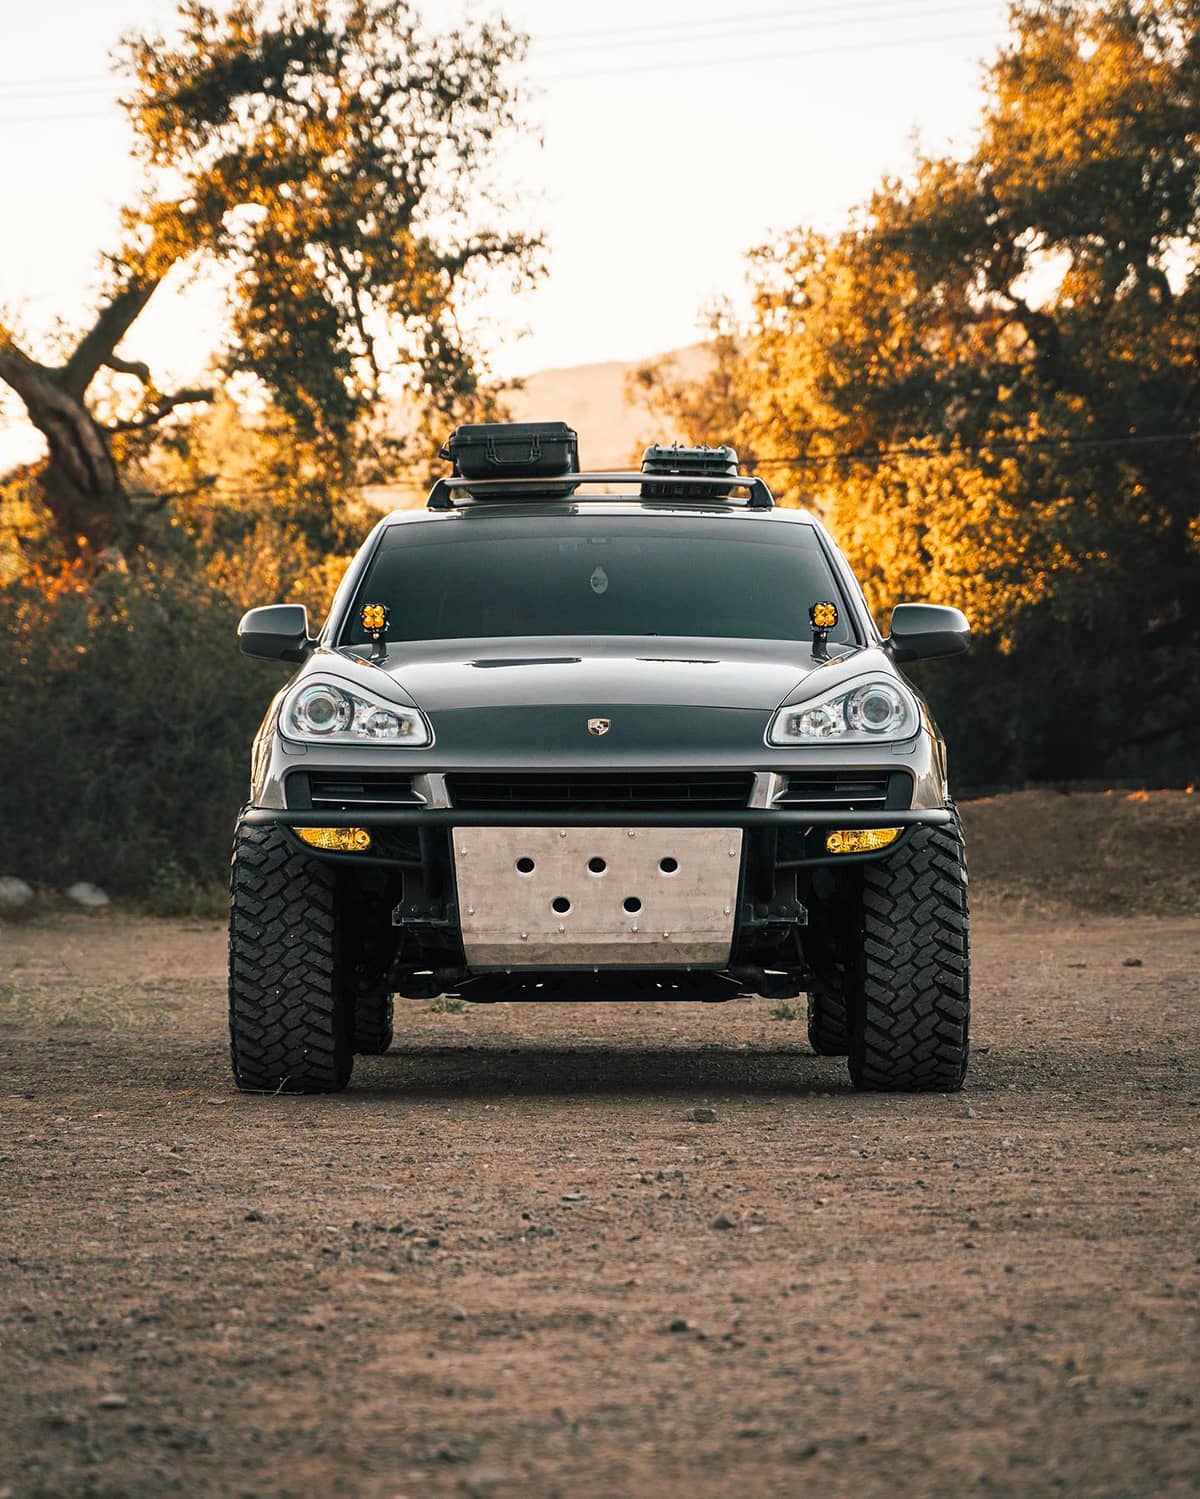 Lifted Porsche Cayenne 957 pre-runner style off-road bumper with a skid plate and amber pod lights